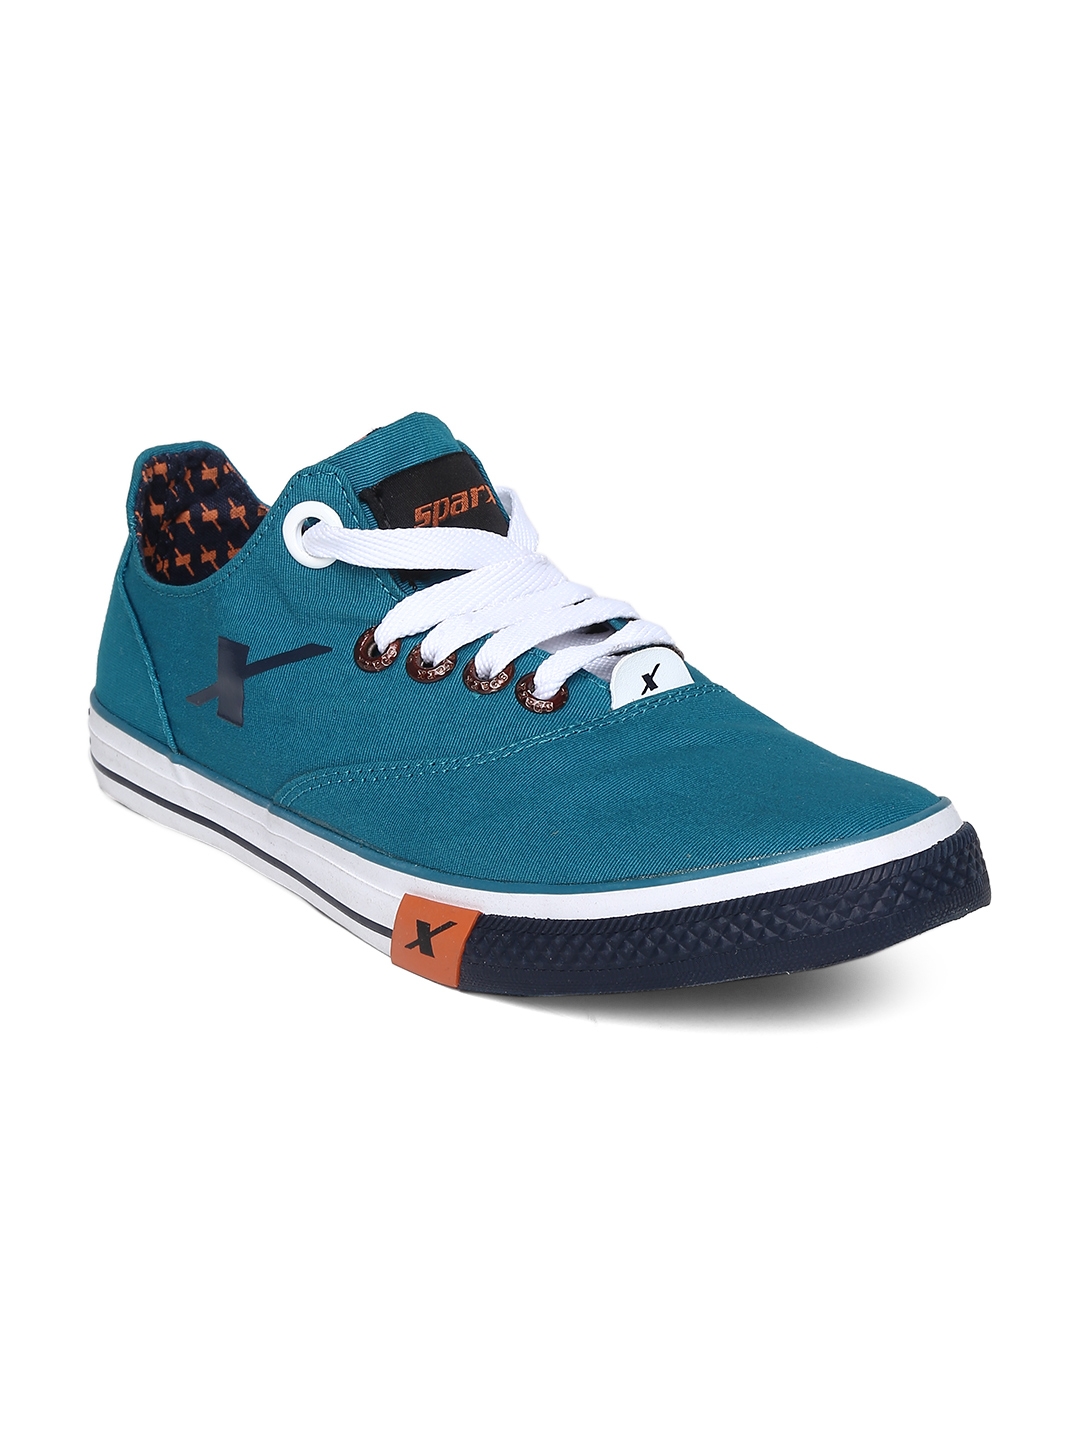 Buy Sparx Men Teal Blue Casual Shoes 